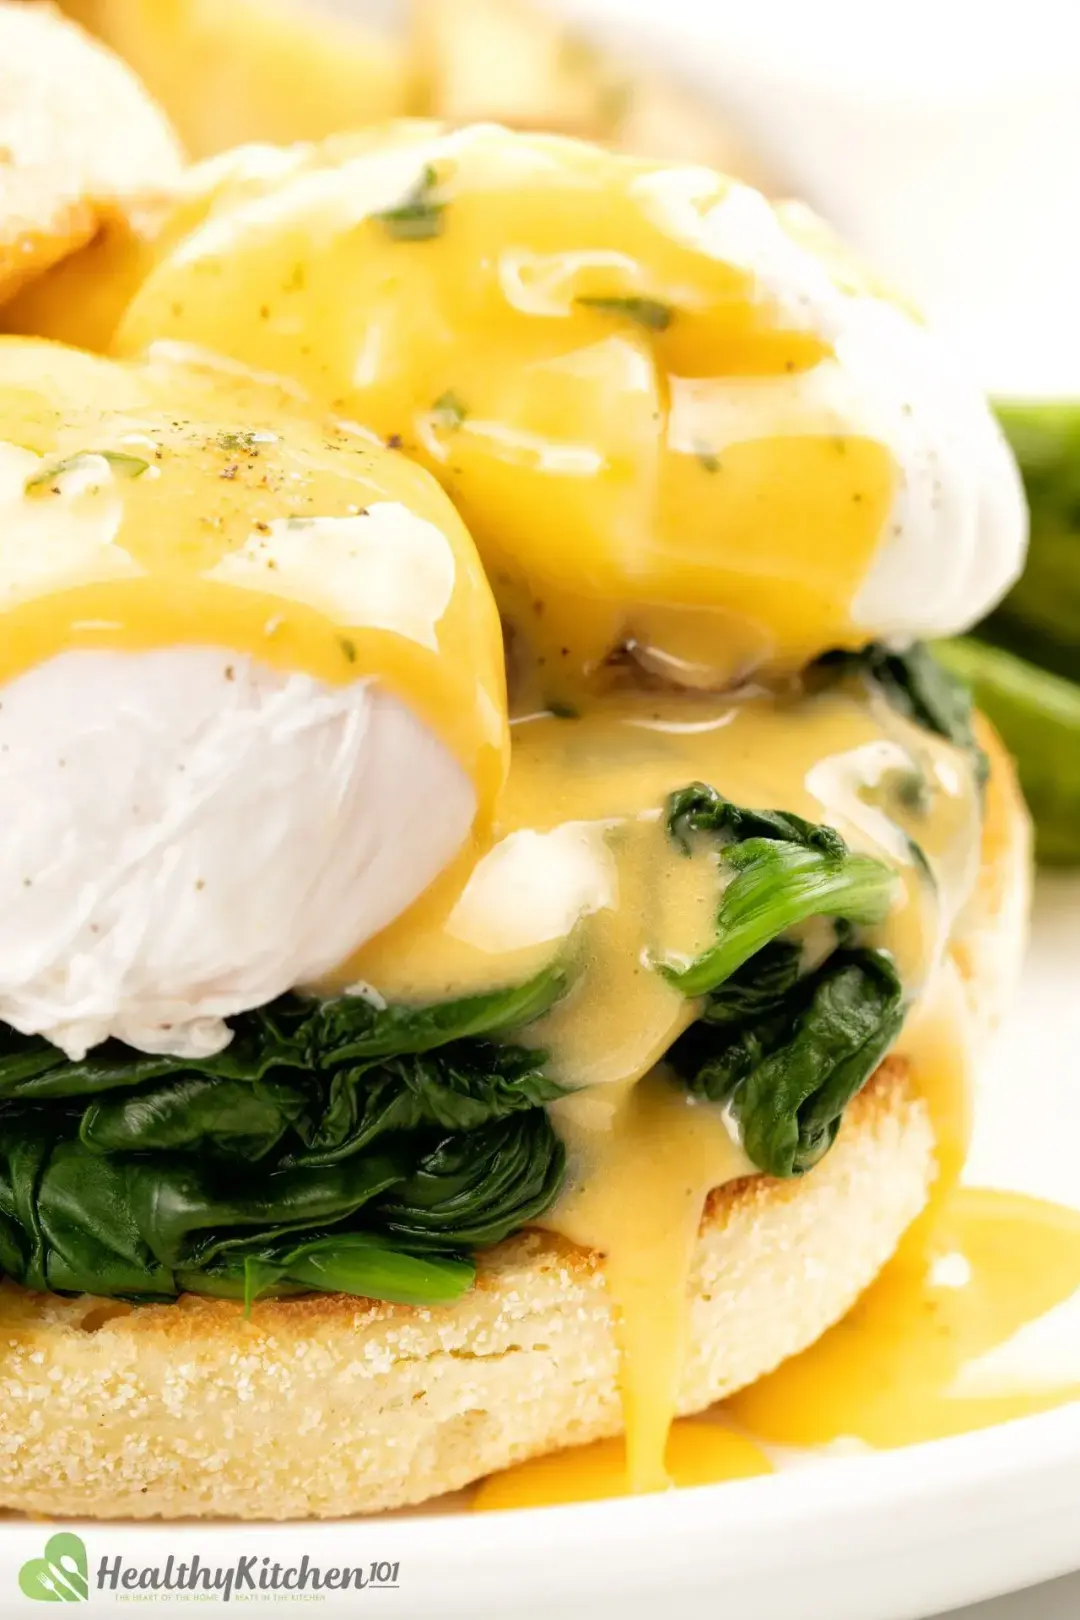 A close-up shot of poached eggs drenched in hollandaise sauce over cooked and squeezed spinach and half an English muffin